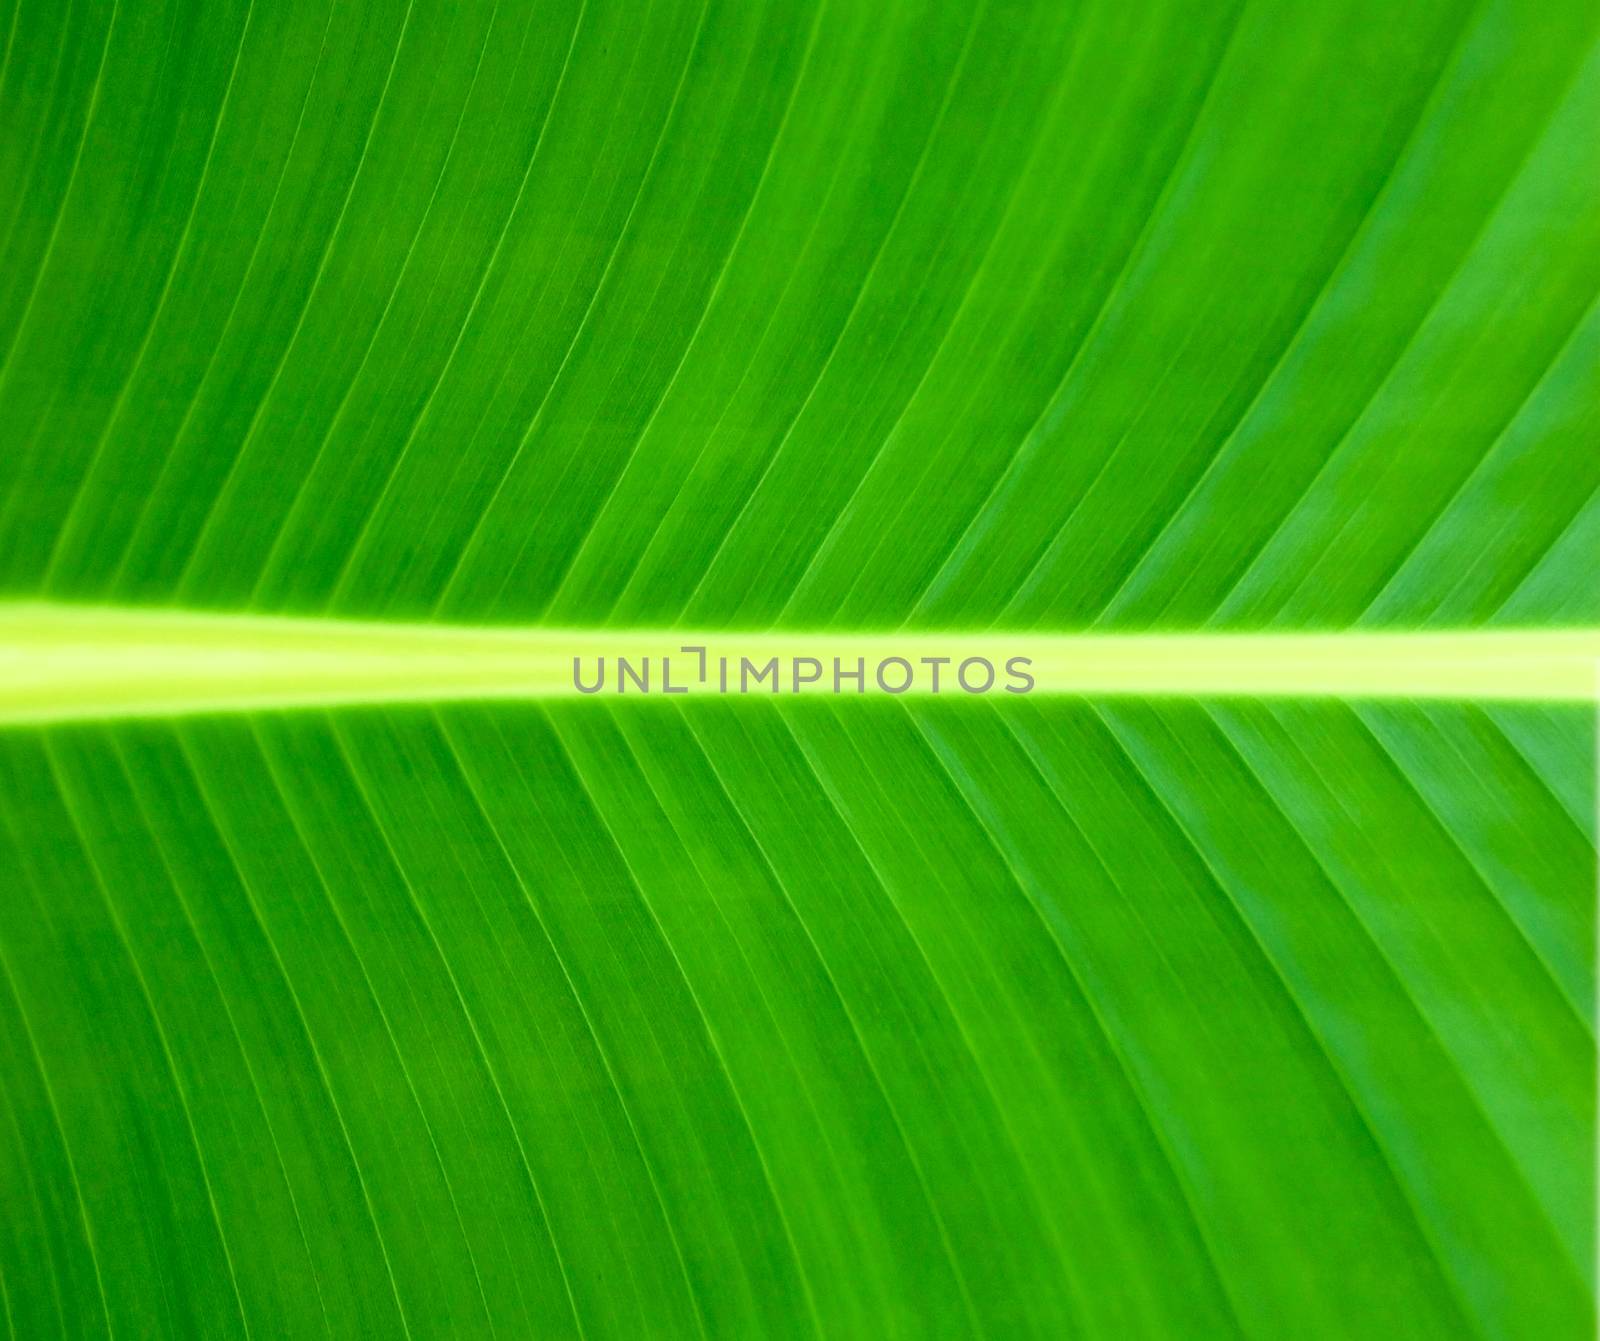 Texture of a green leaf background by ozaiachin